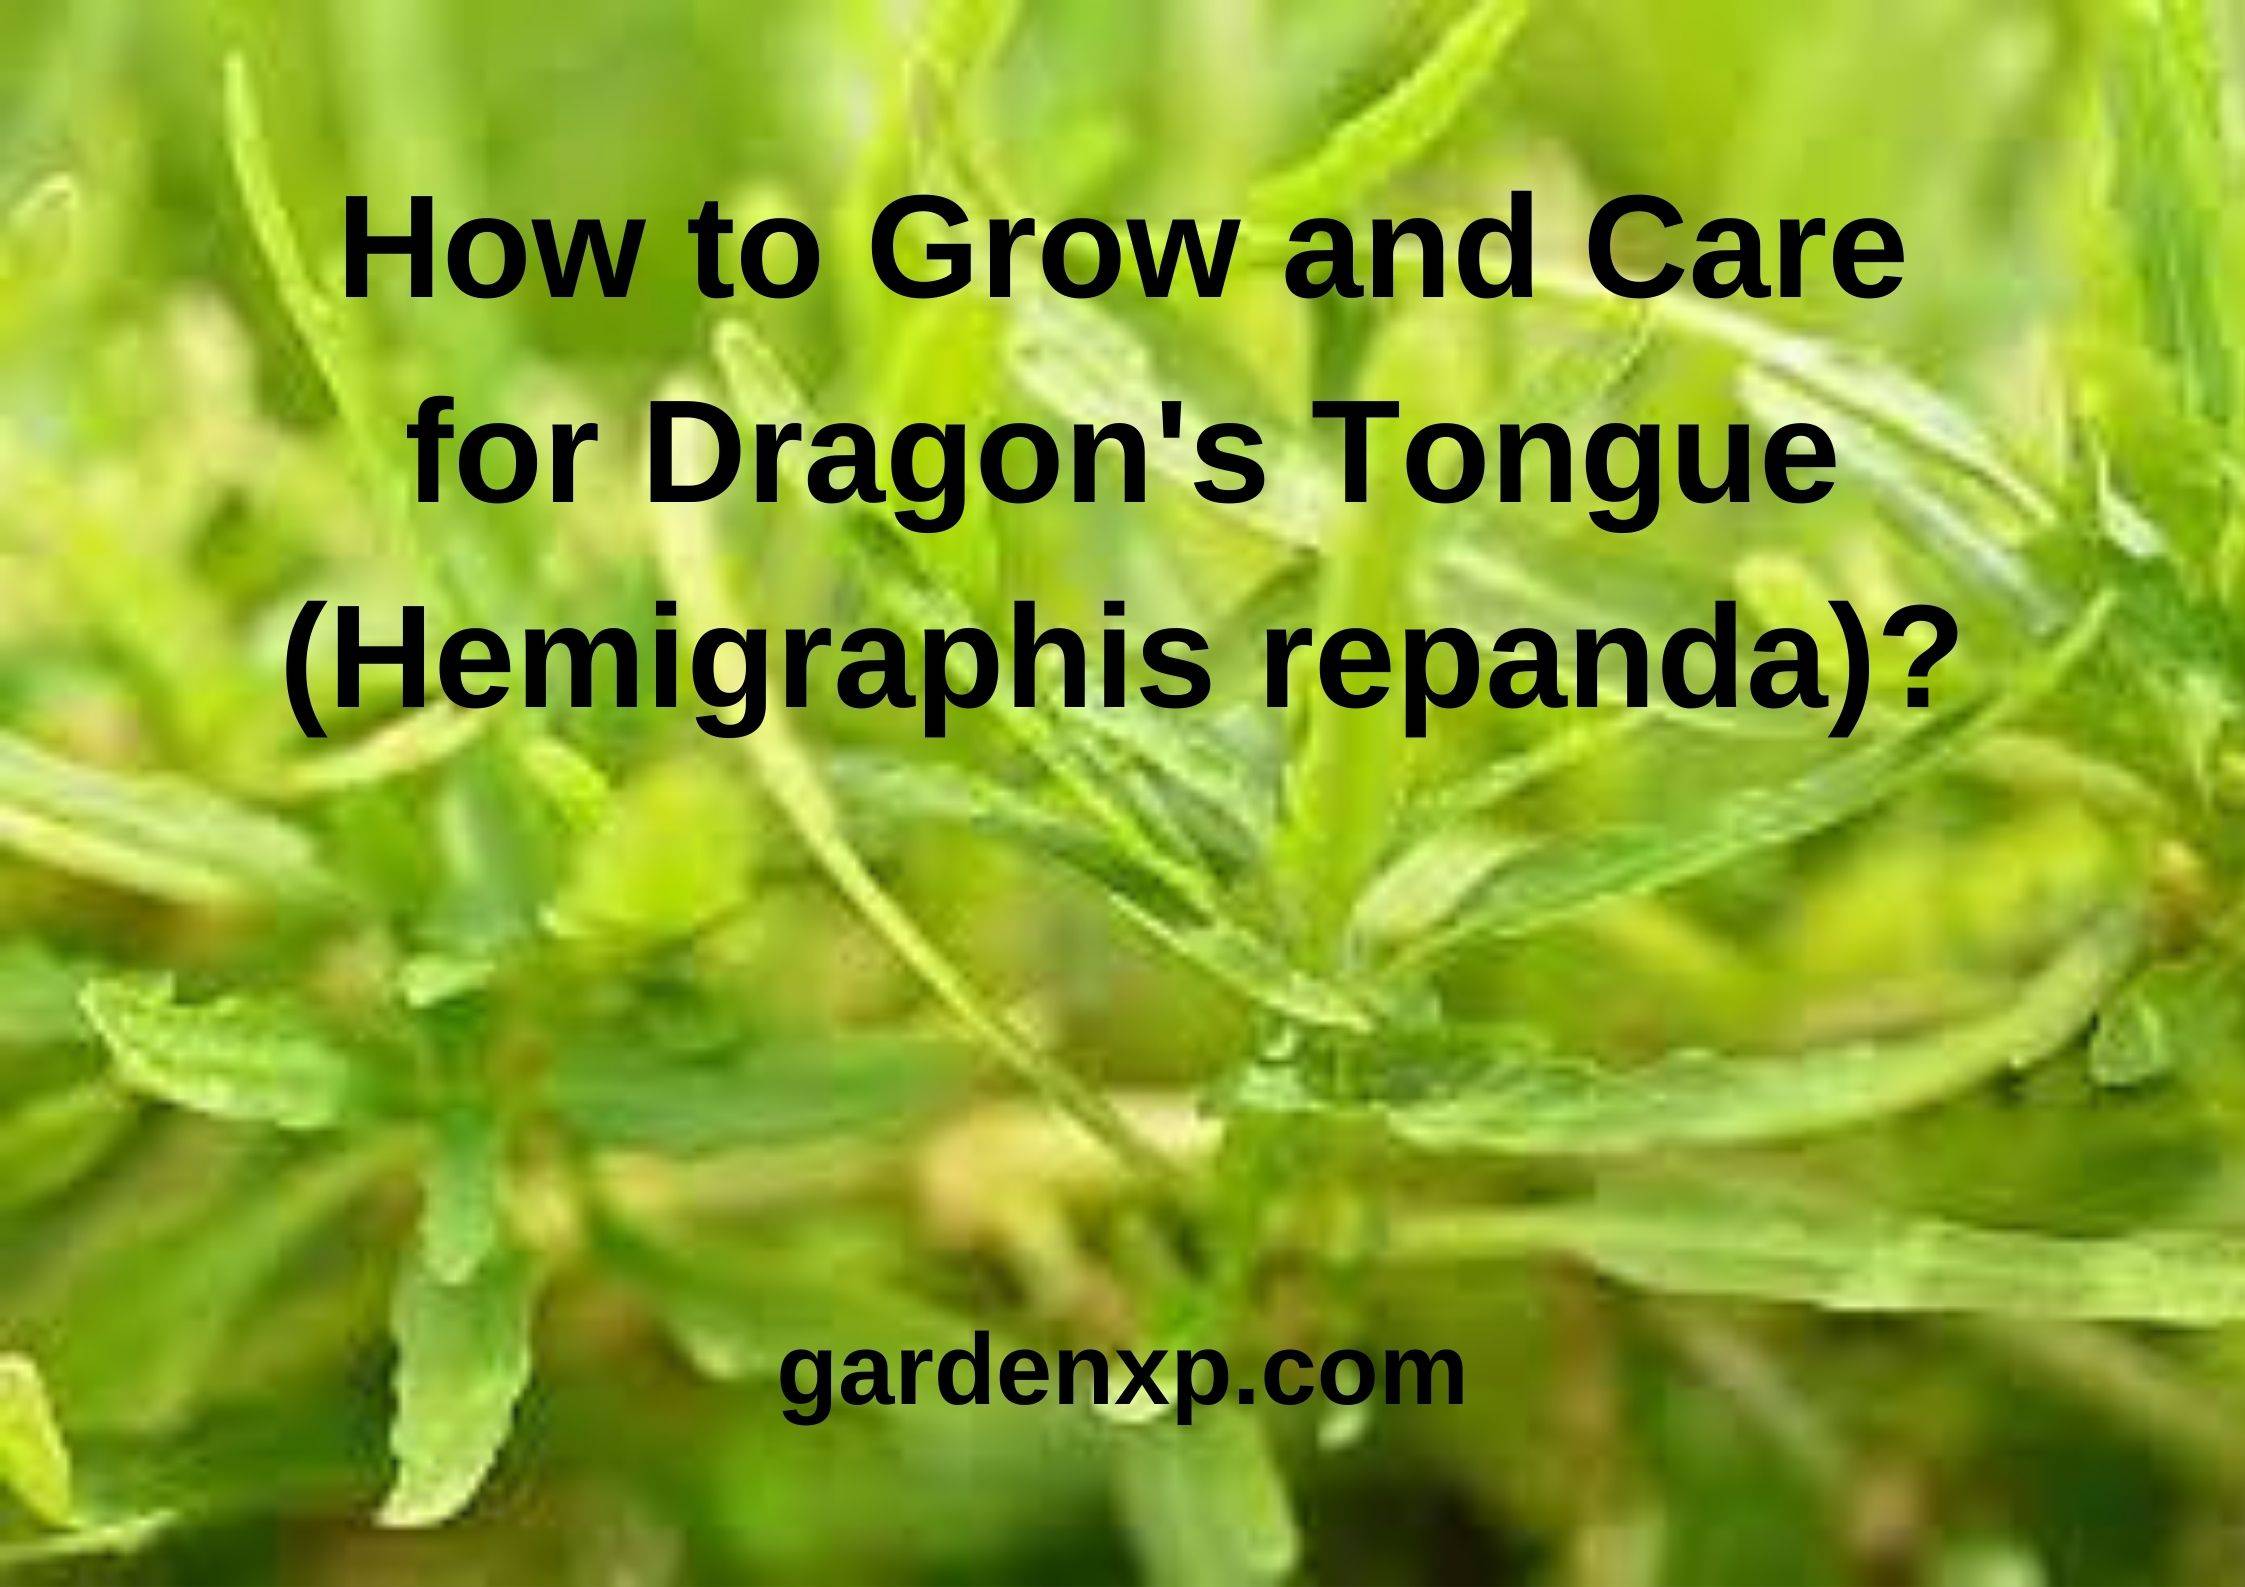 How to Grow and Care for Dragon's Tongue(Hemigraphis repanda)?